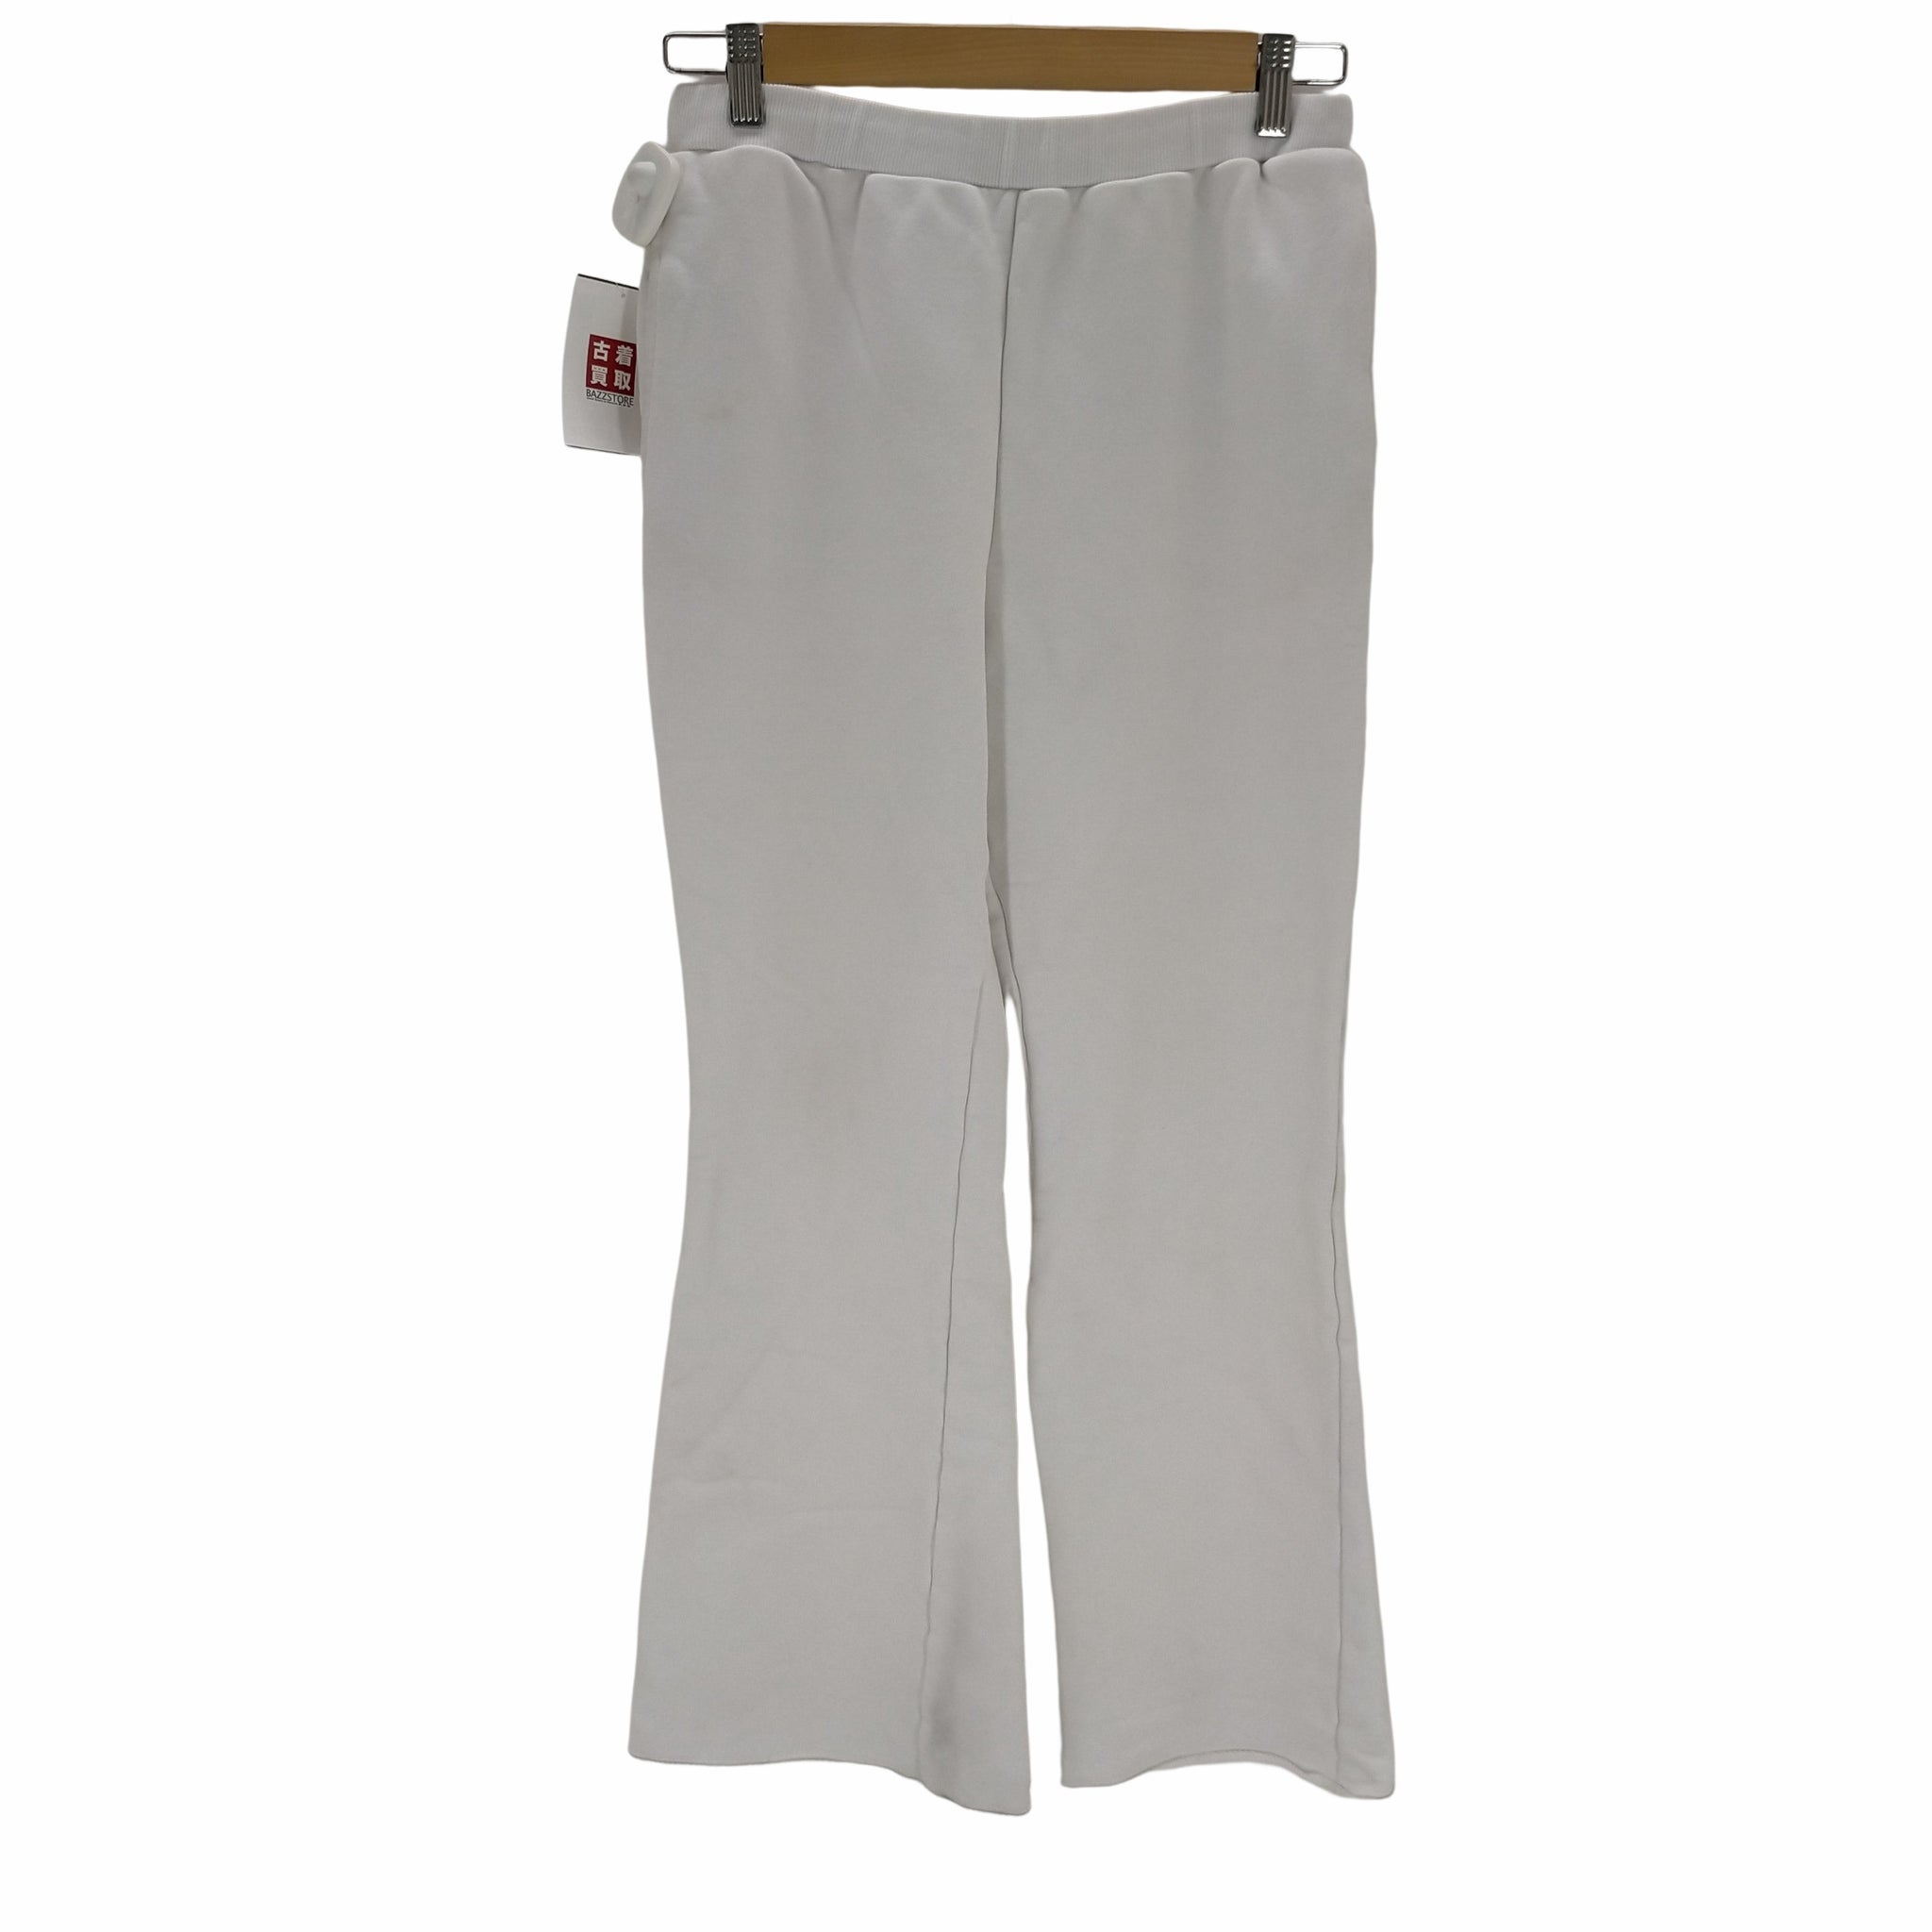 Boys plain front school trousers - Quality school uniforms at the School  Clothing Company